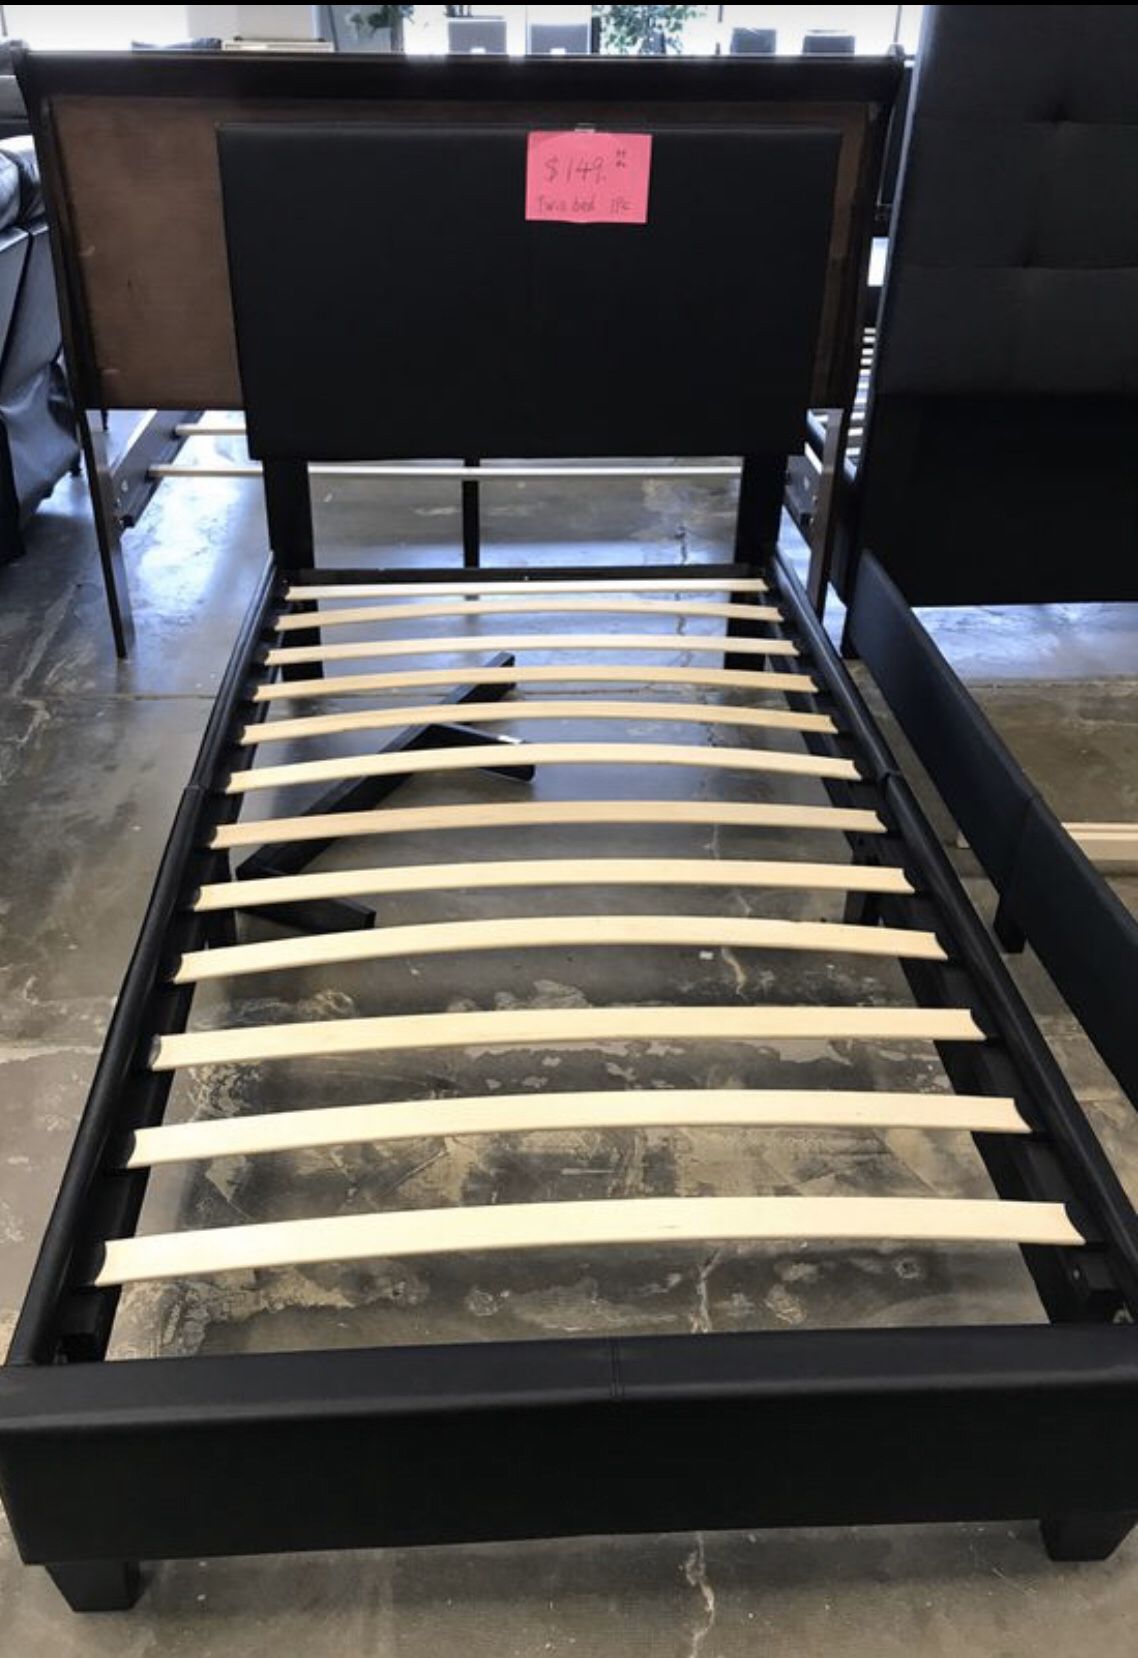 Brand new twin size bed frame